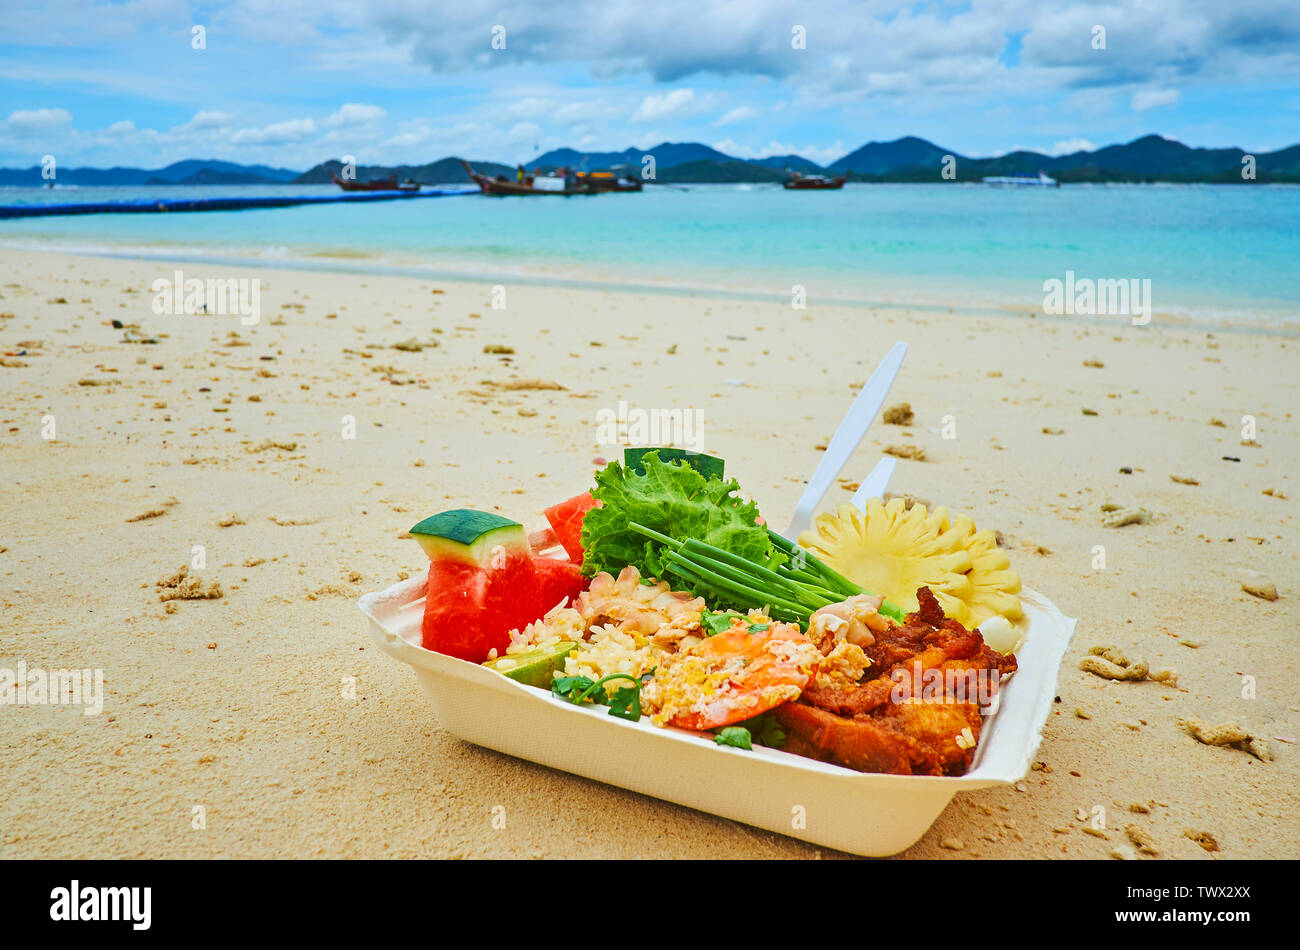 The lunch box with traditional Thai dish - grilled seafood, rice, fresh  vegetables and fruits, on the beach of Khai Nai island, Phuket, Thailand  Stock Photo - Alamy